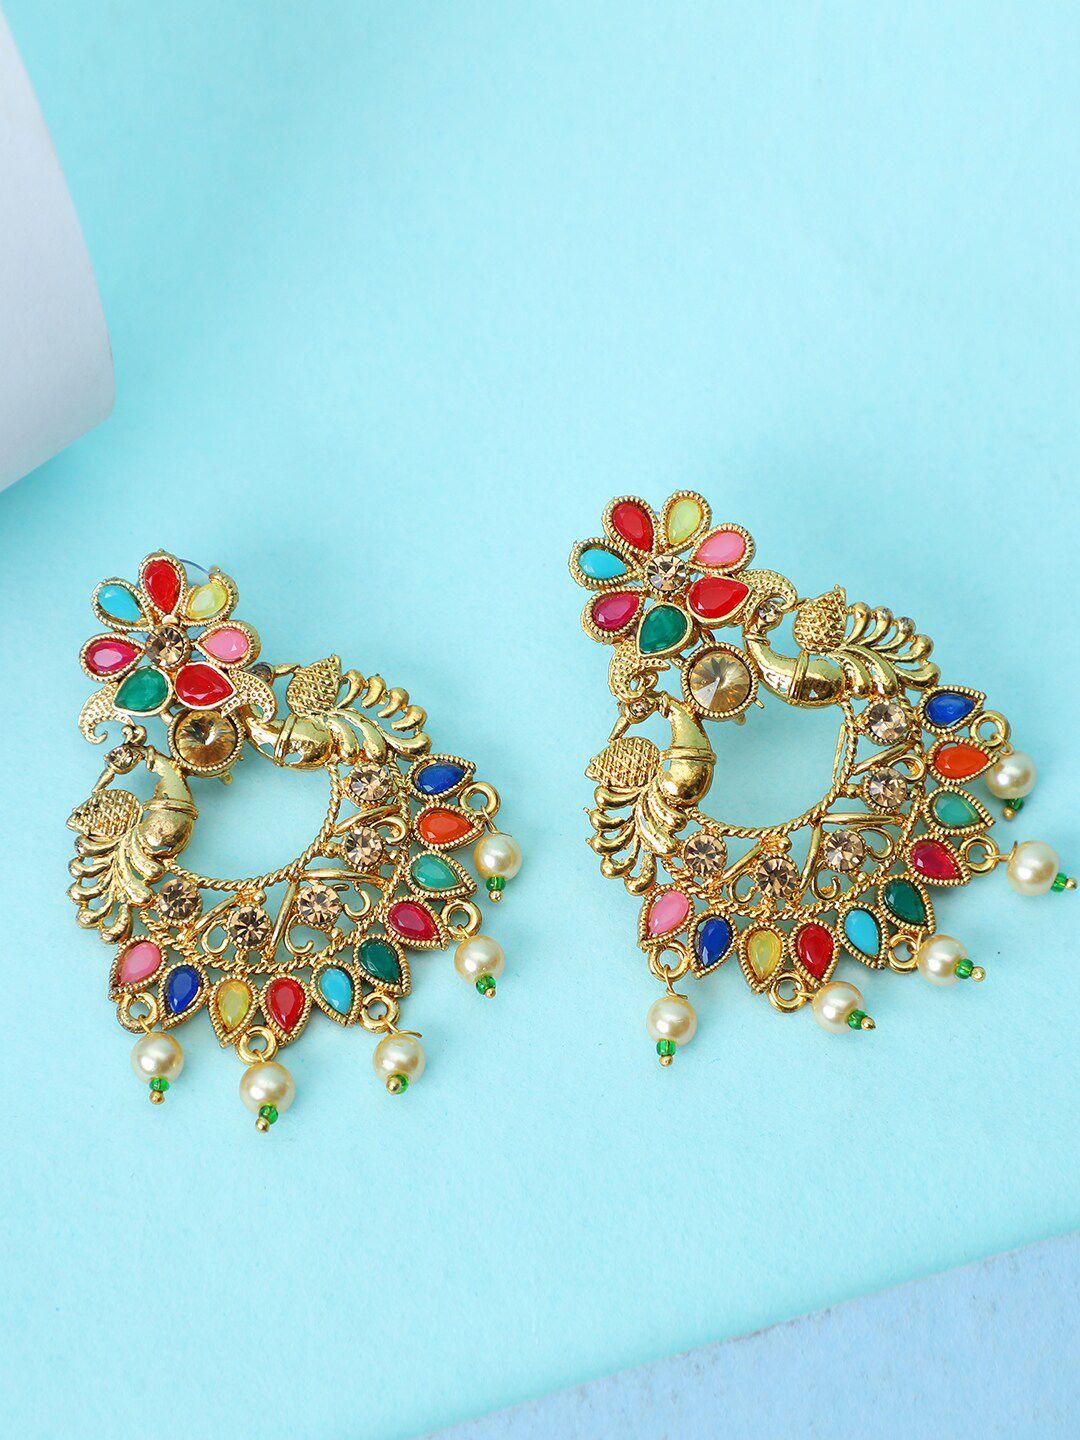 anikas creation gold plated stone and pearl peacock shaped chandbalis earrings